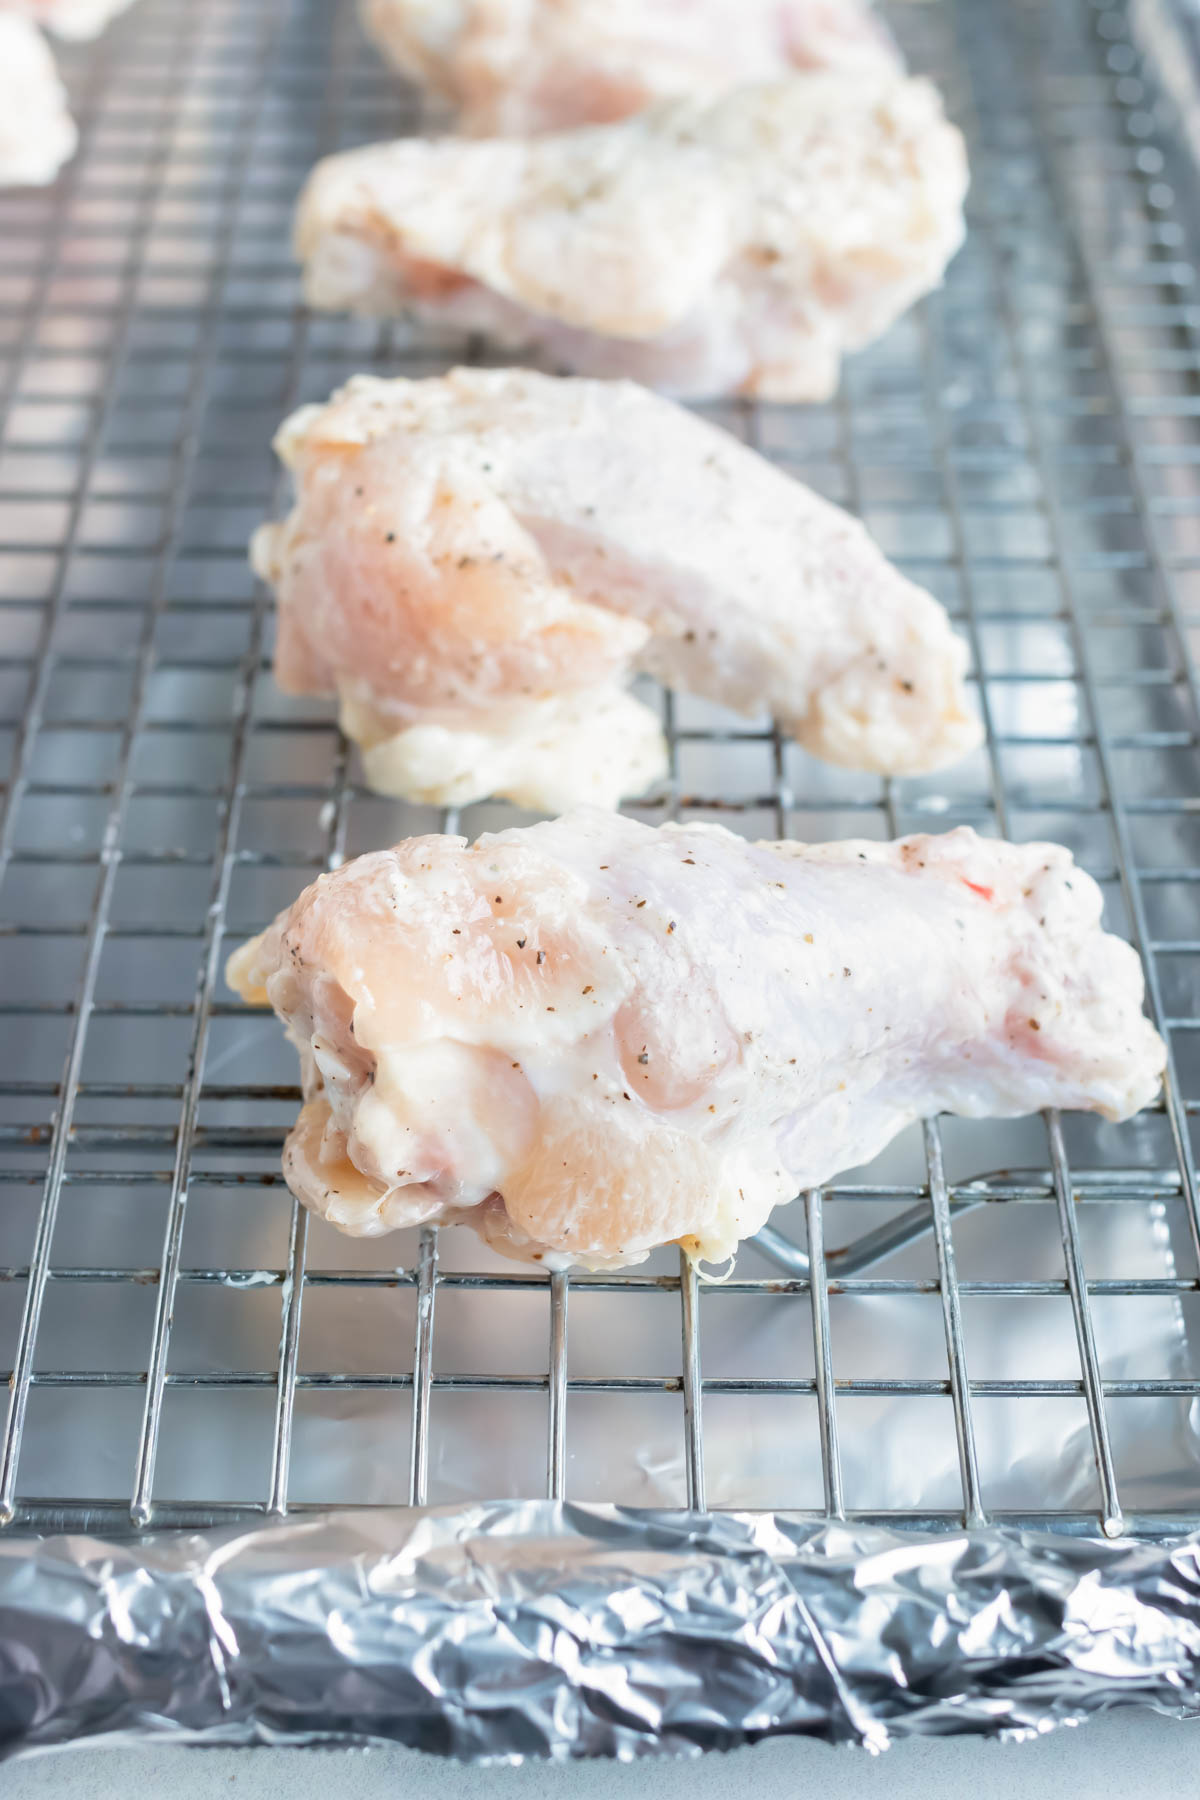 Cornstarch covered chicken wings are placed on a baking sheet.